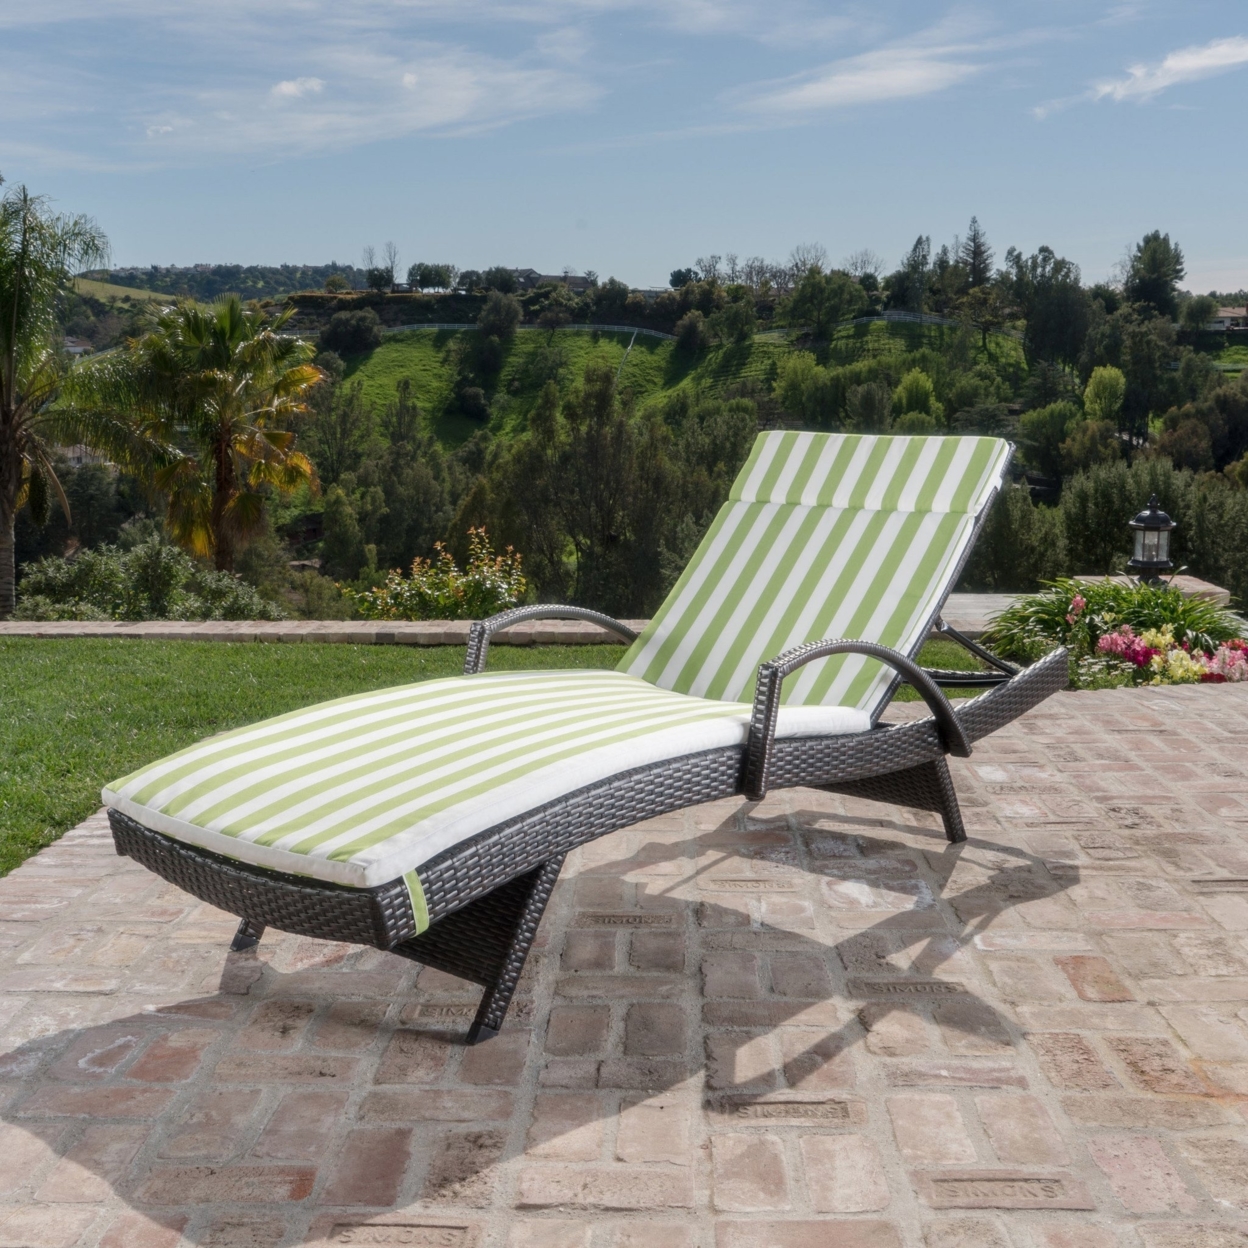 Lakeport Outdoor Wicker Lounge With Water Resistant Cushion - Green & White Stripes